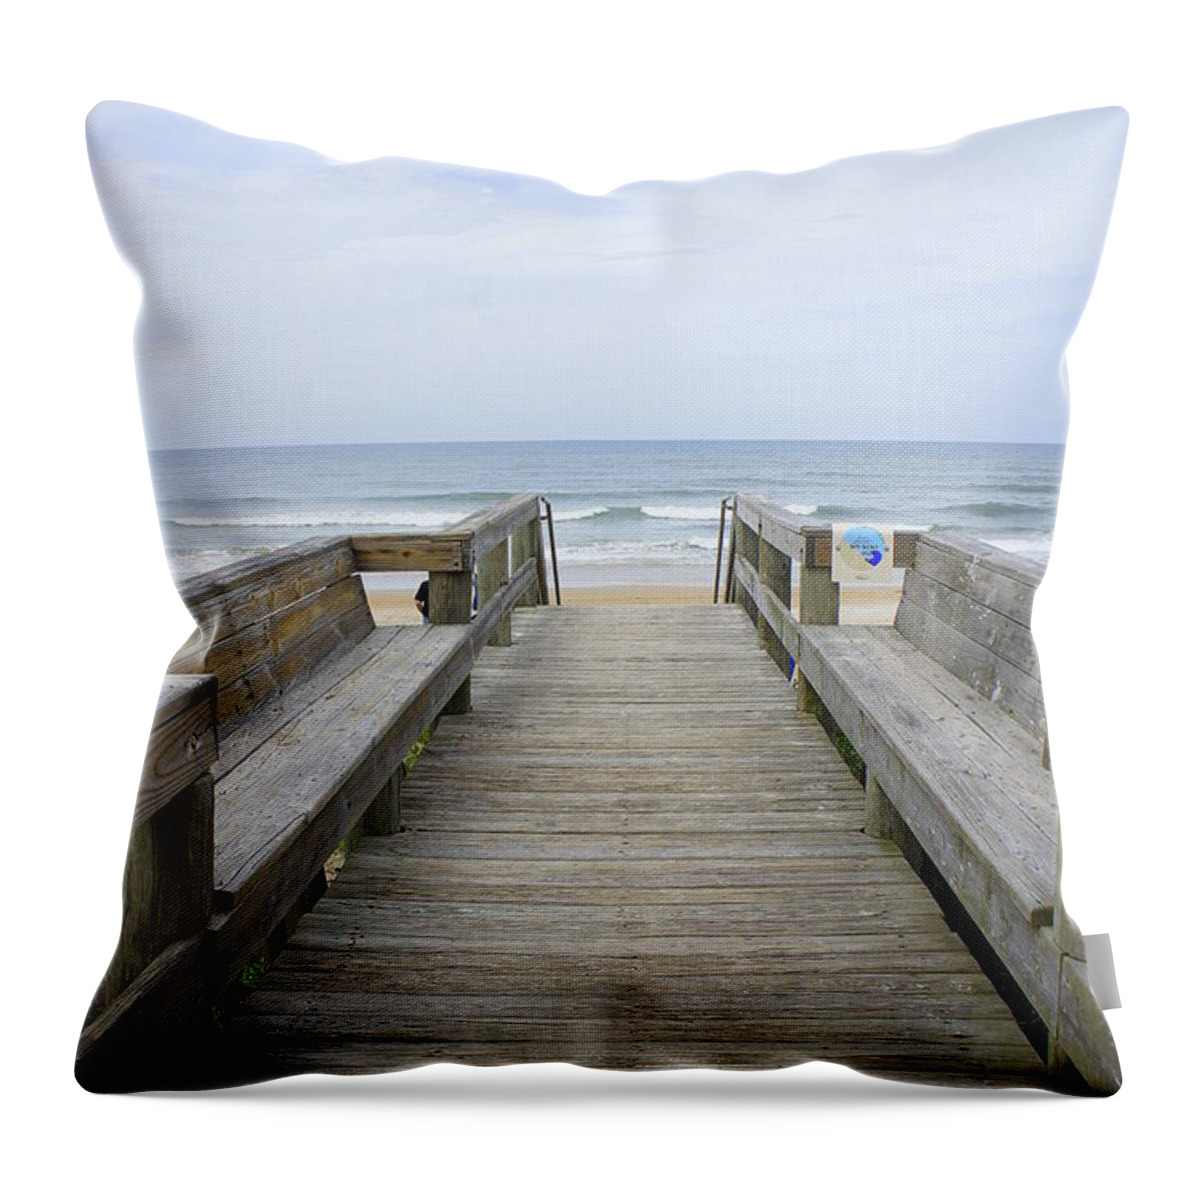 Daytona Beach Throw Pillow featuring the photograph A Welcoming View by Laurie Perry